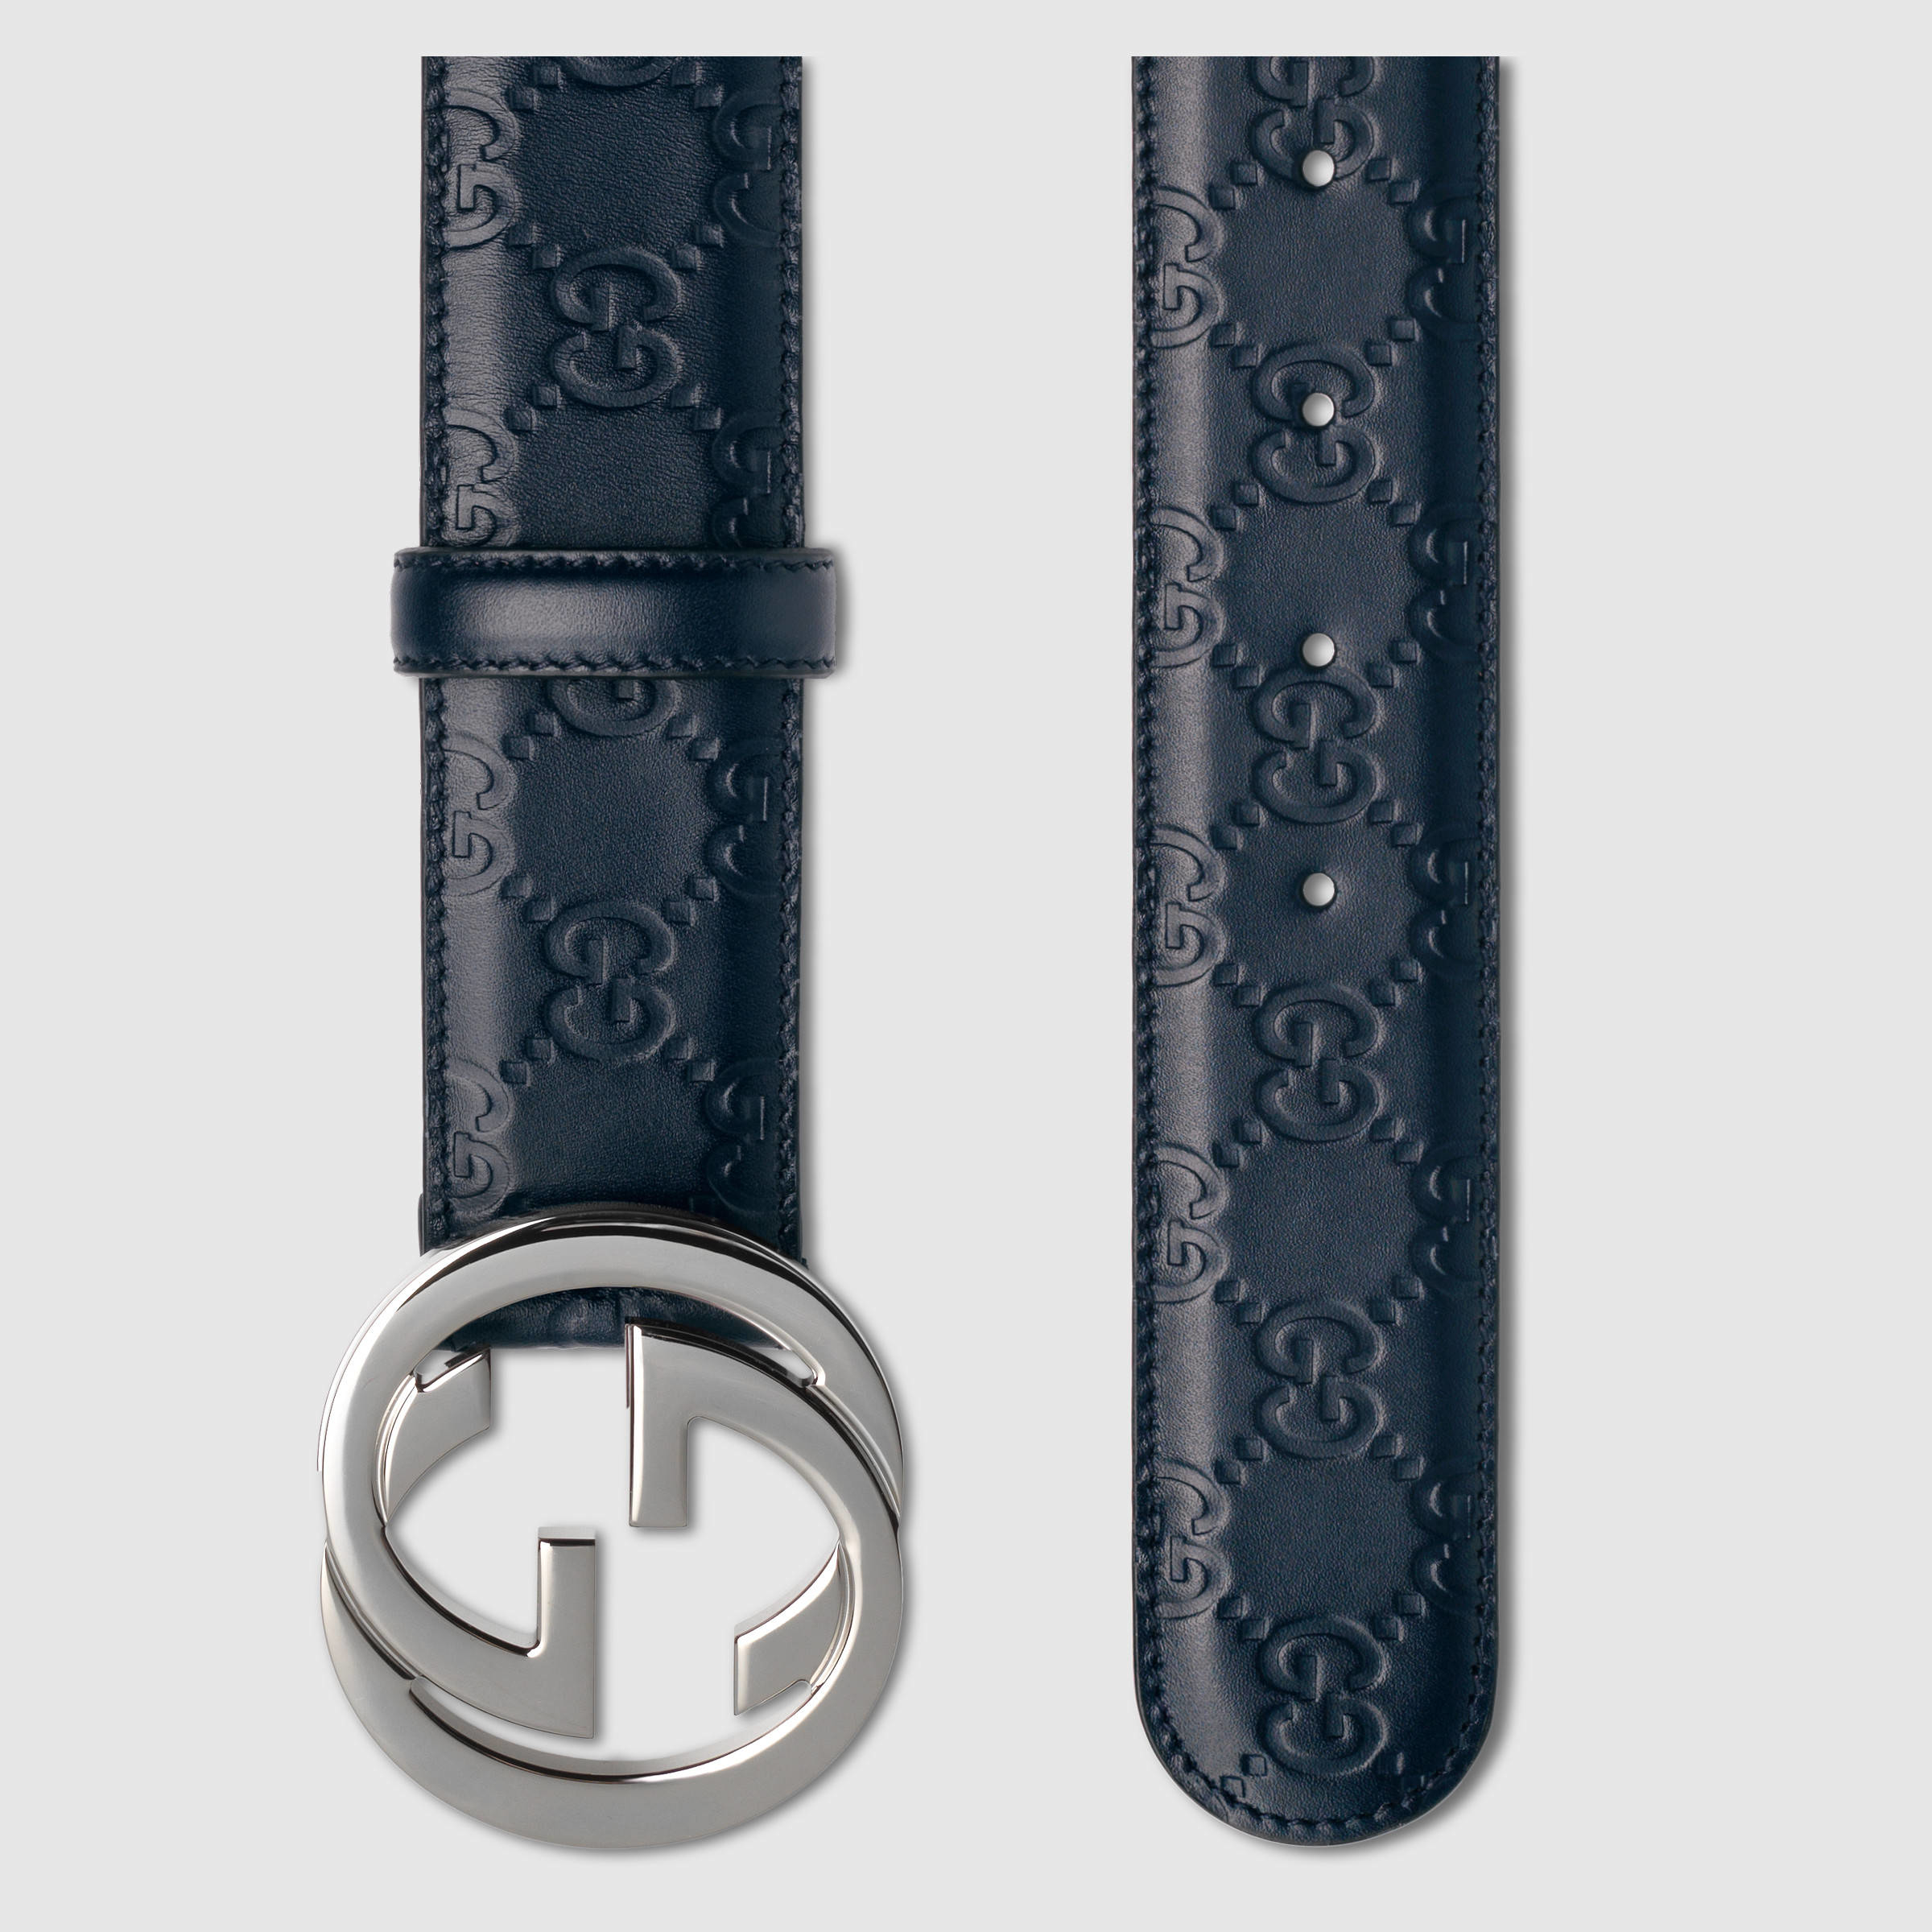 Gucci Signature Leather Belt in Black for Men | Lyst